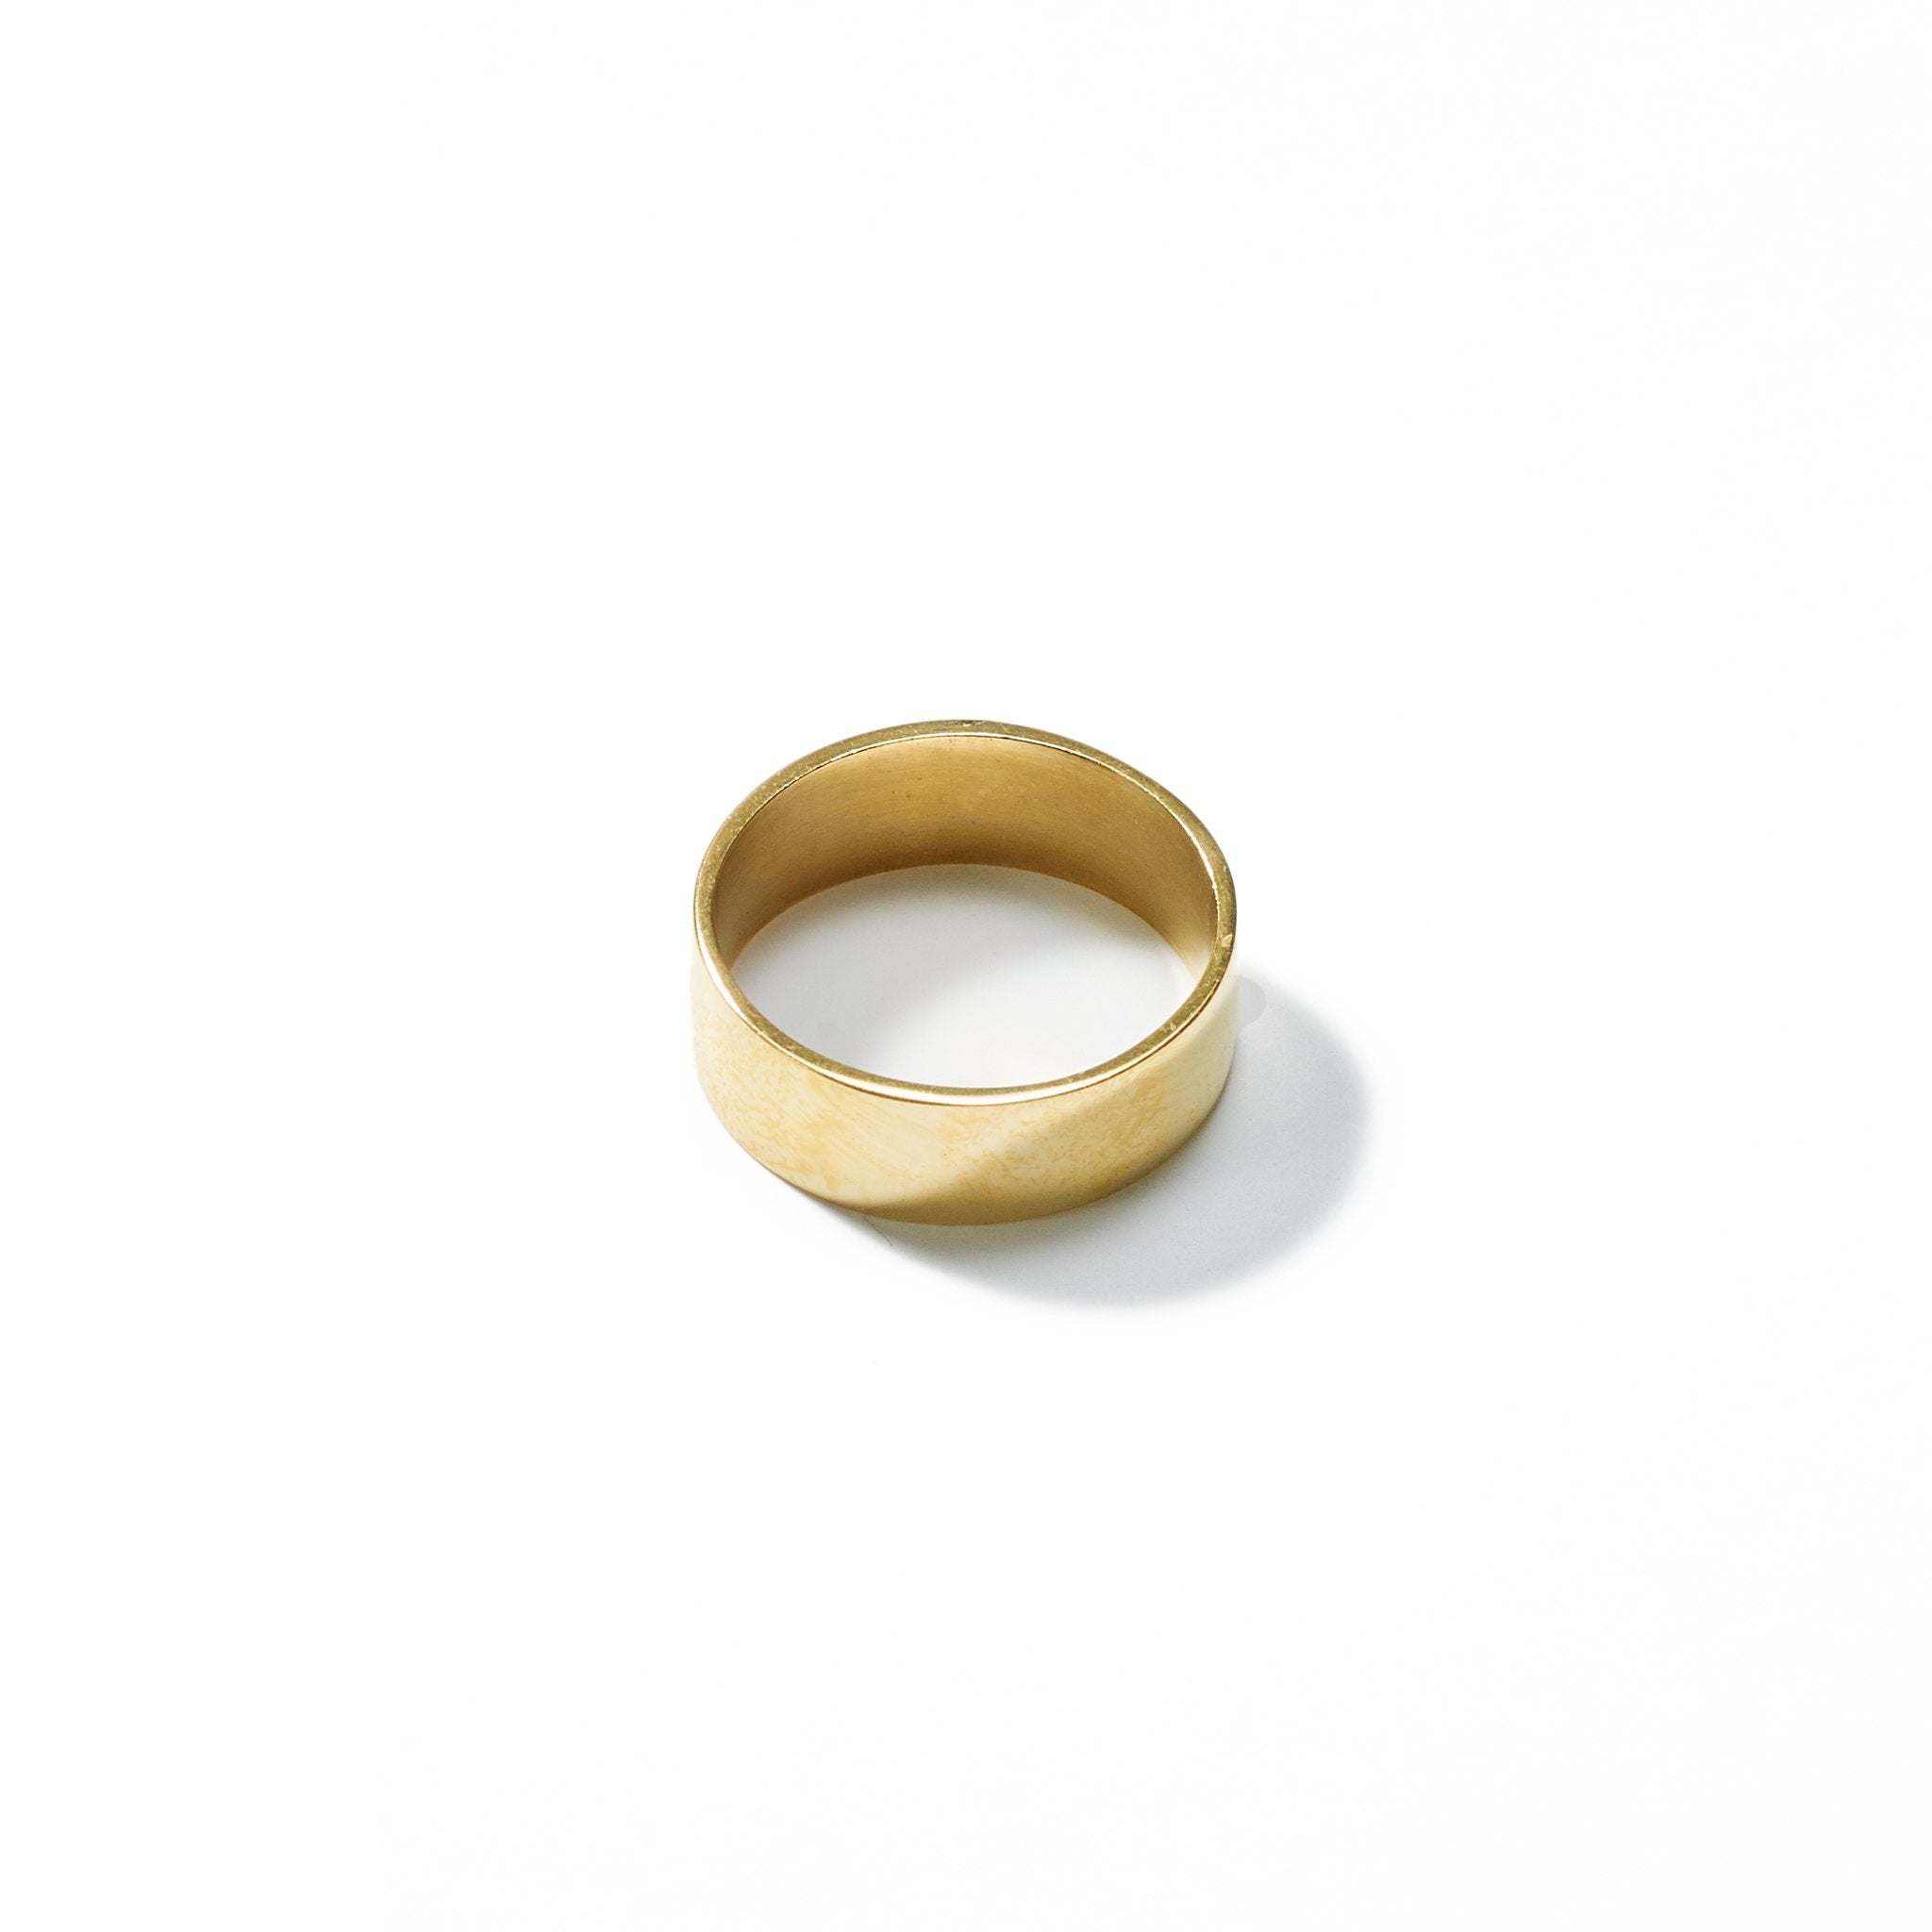 A classic and understated size 5 ring, of medium width, handcrafted from upcycled brass.Perfect for stacking or beautiful alone.